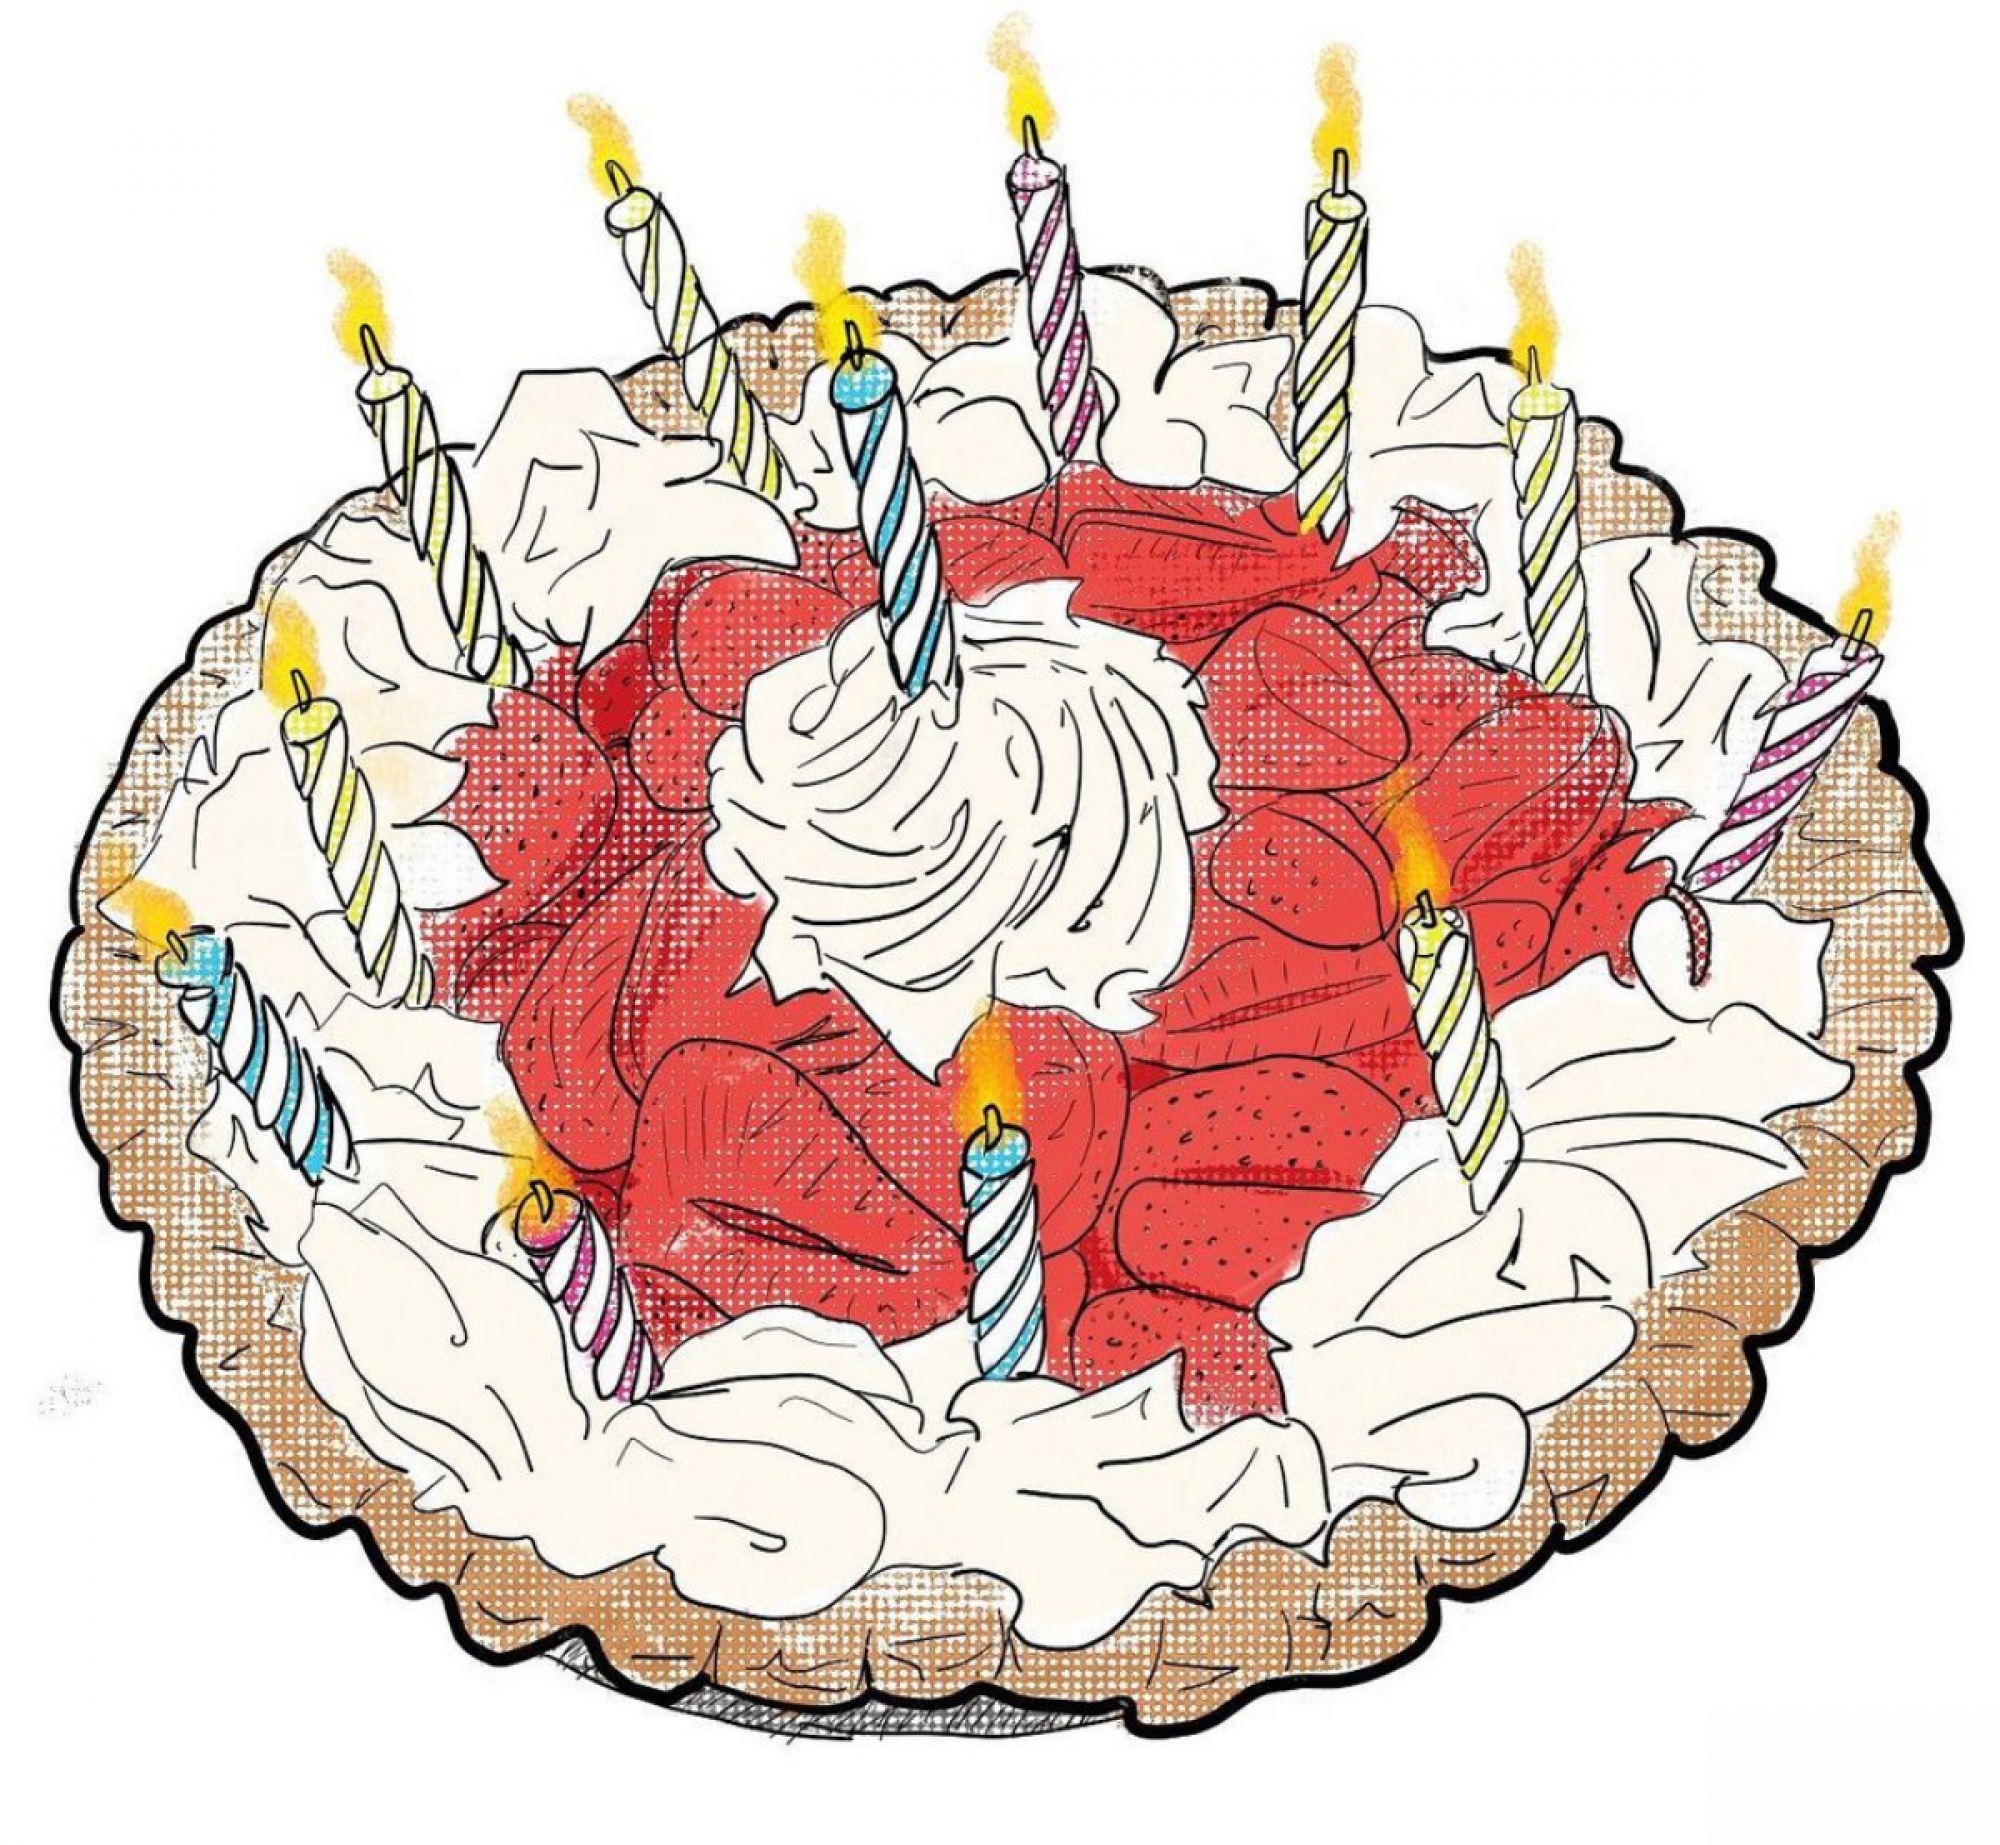 pie with strawberry and cream toppings with 12 candles on top